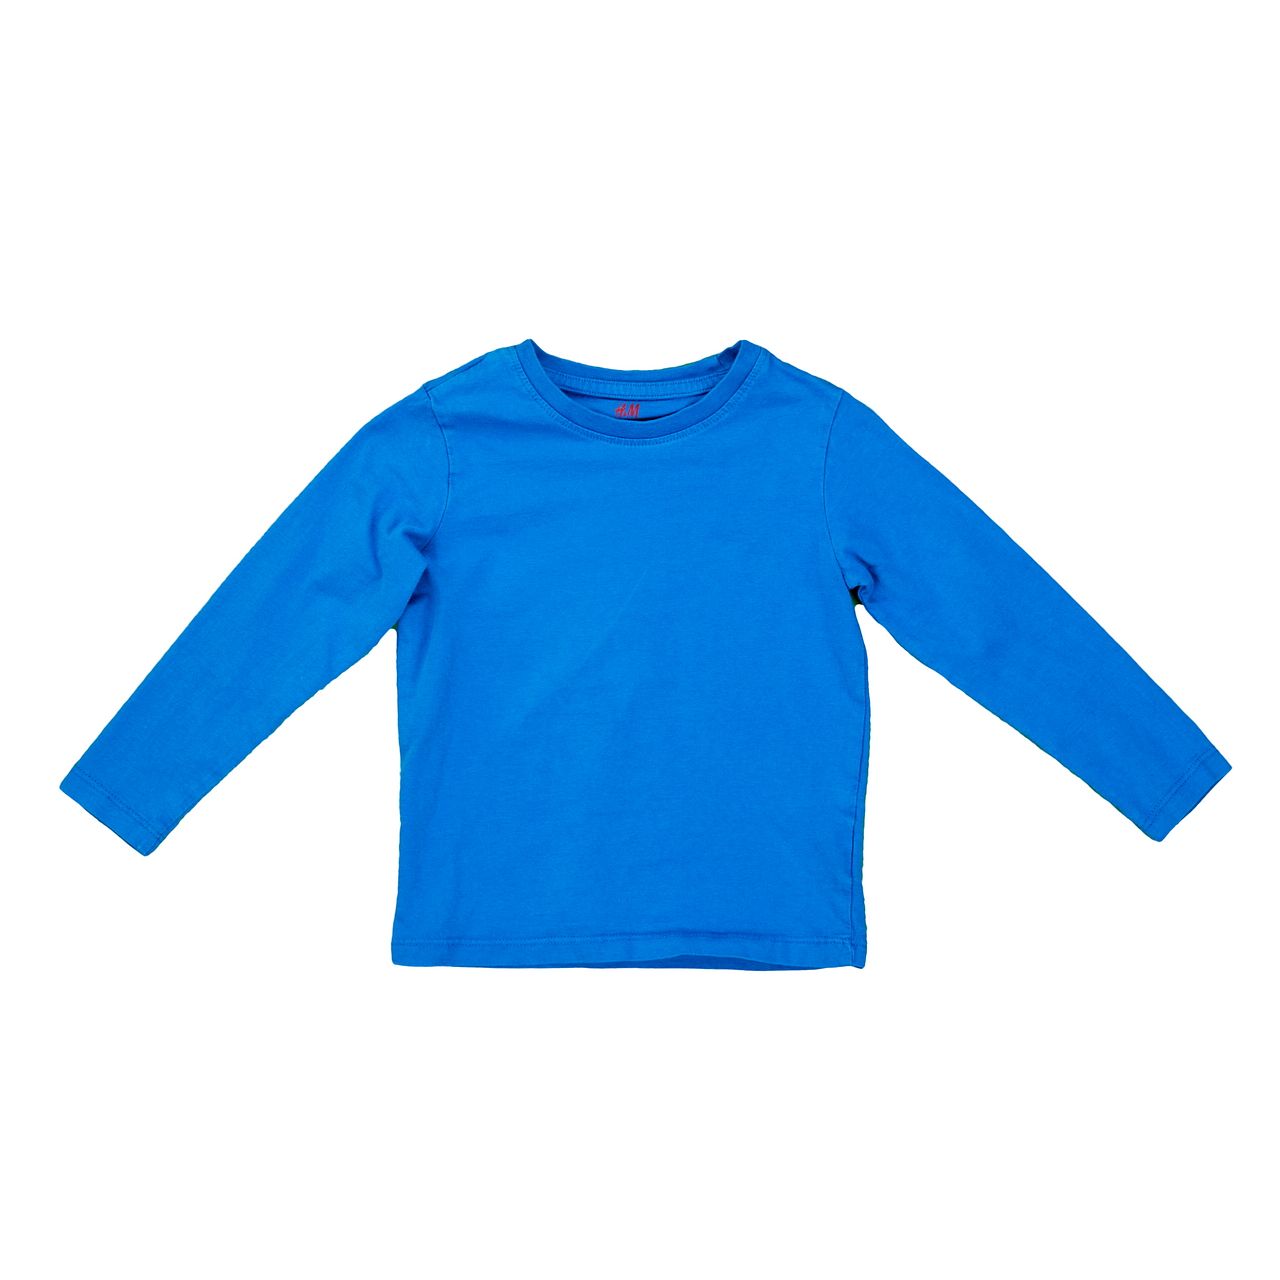 H&M Long-Sleeved T-Shirt 98 cm front preview